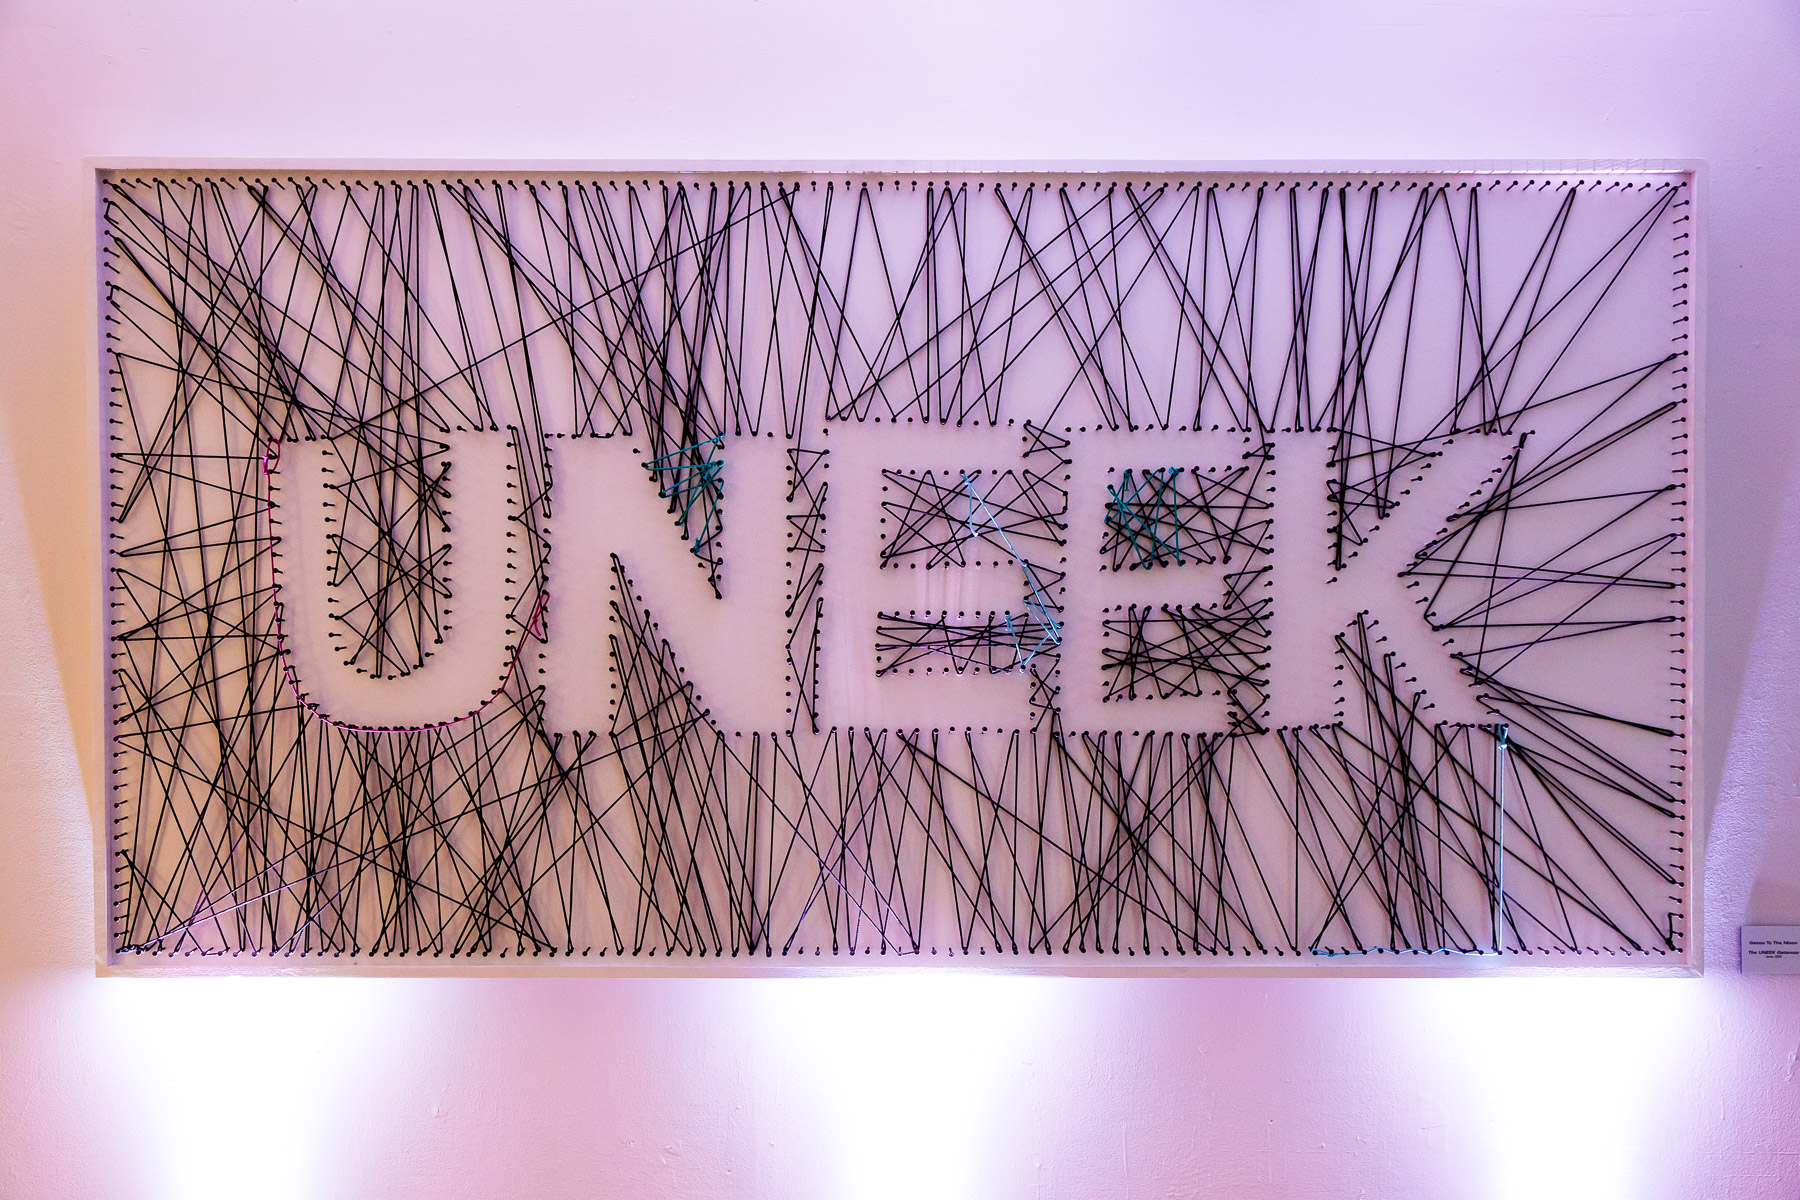 KEEN UNEEK, A Gallery Of Self Expression